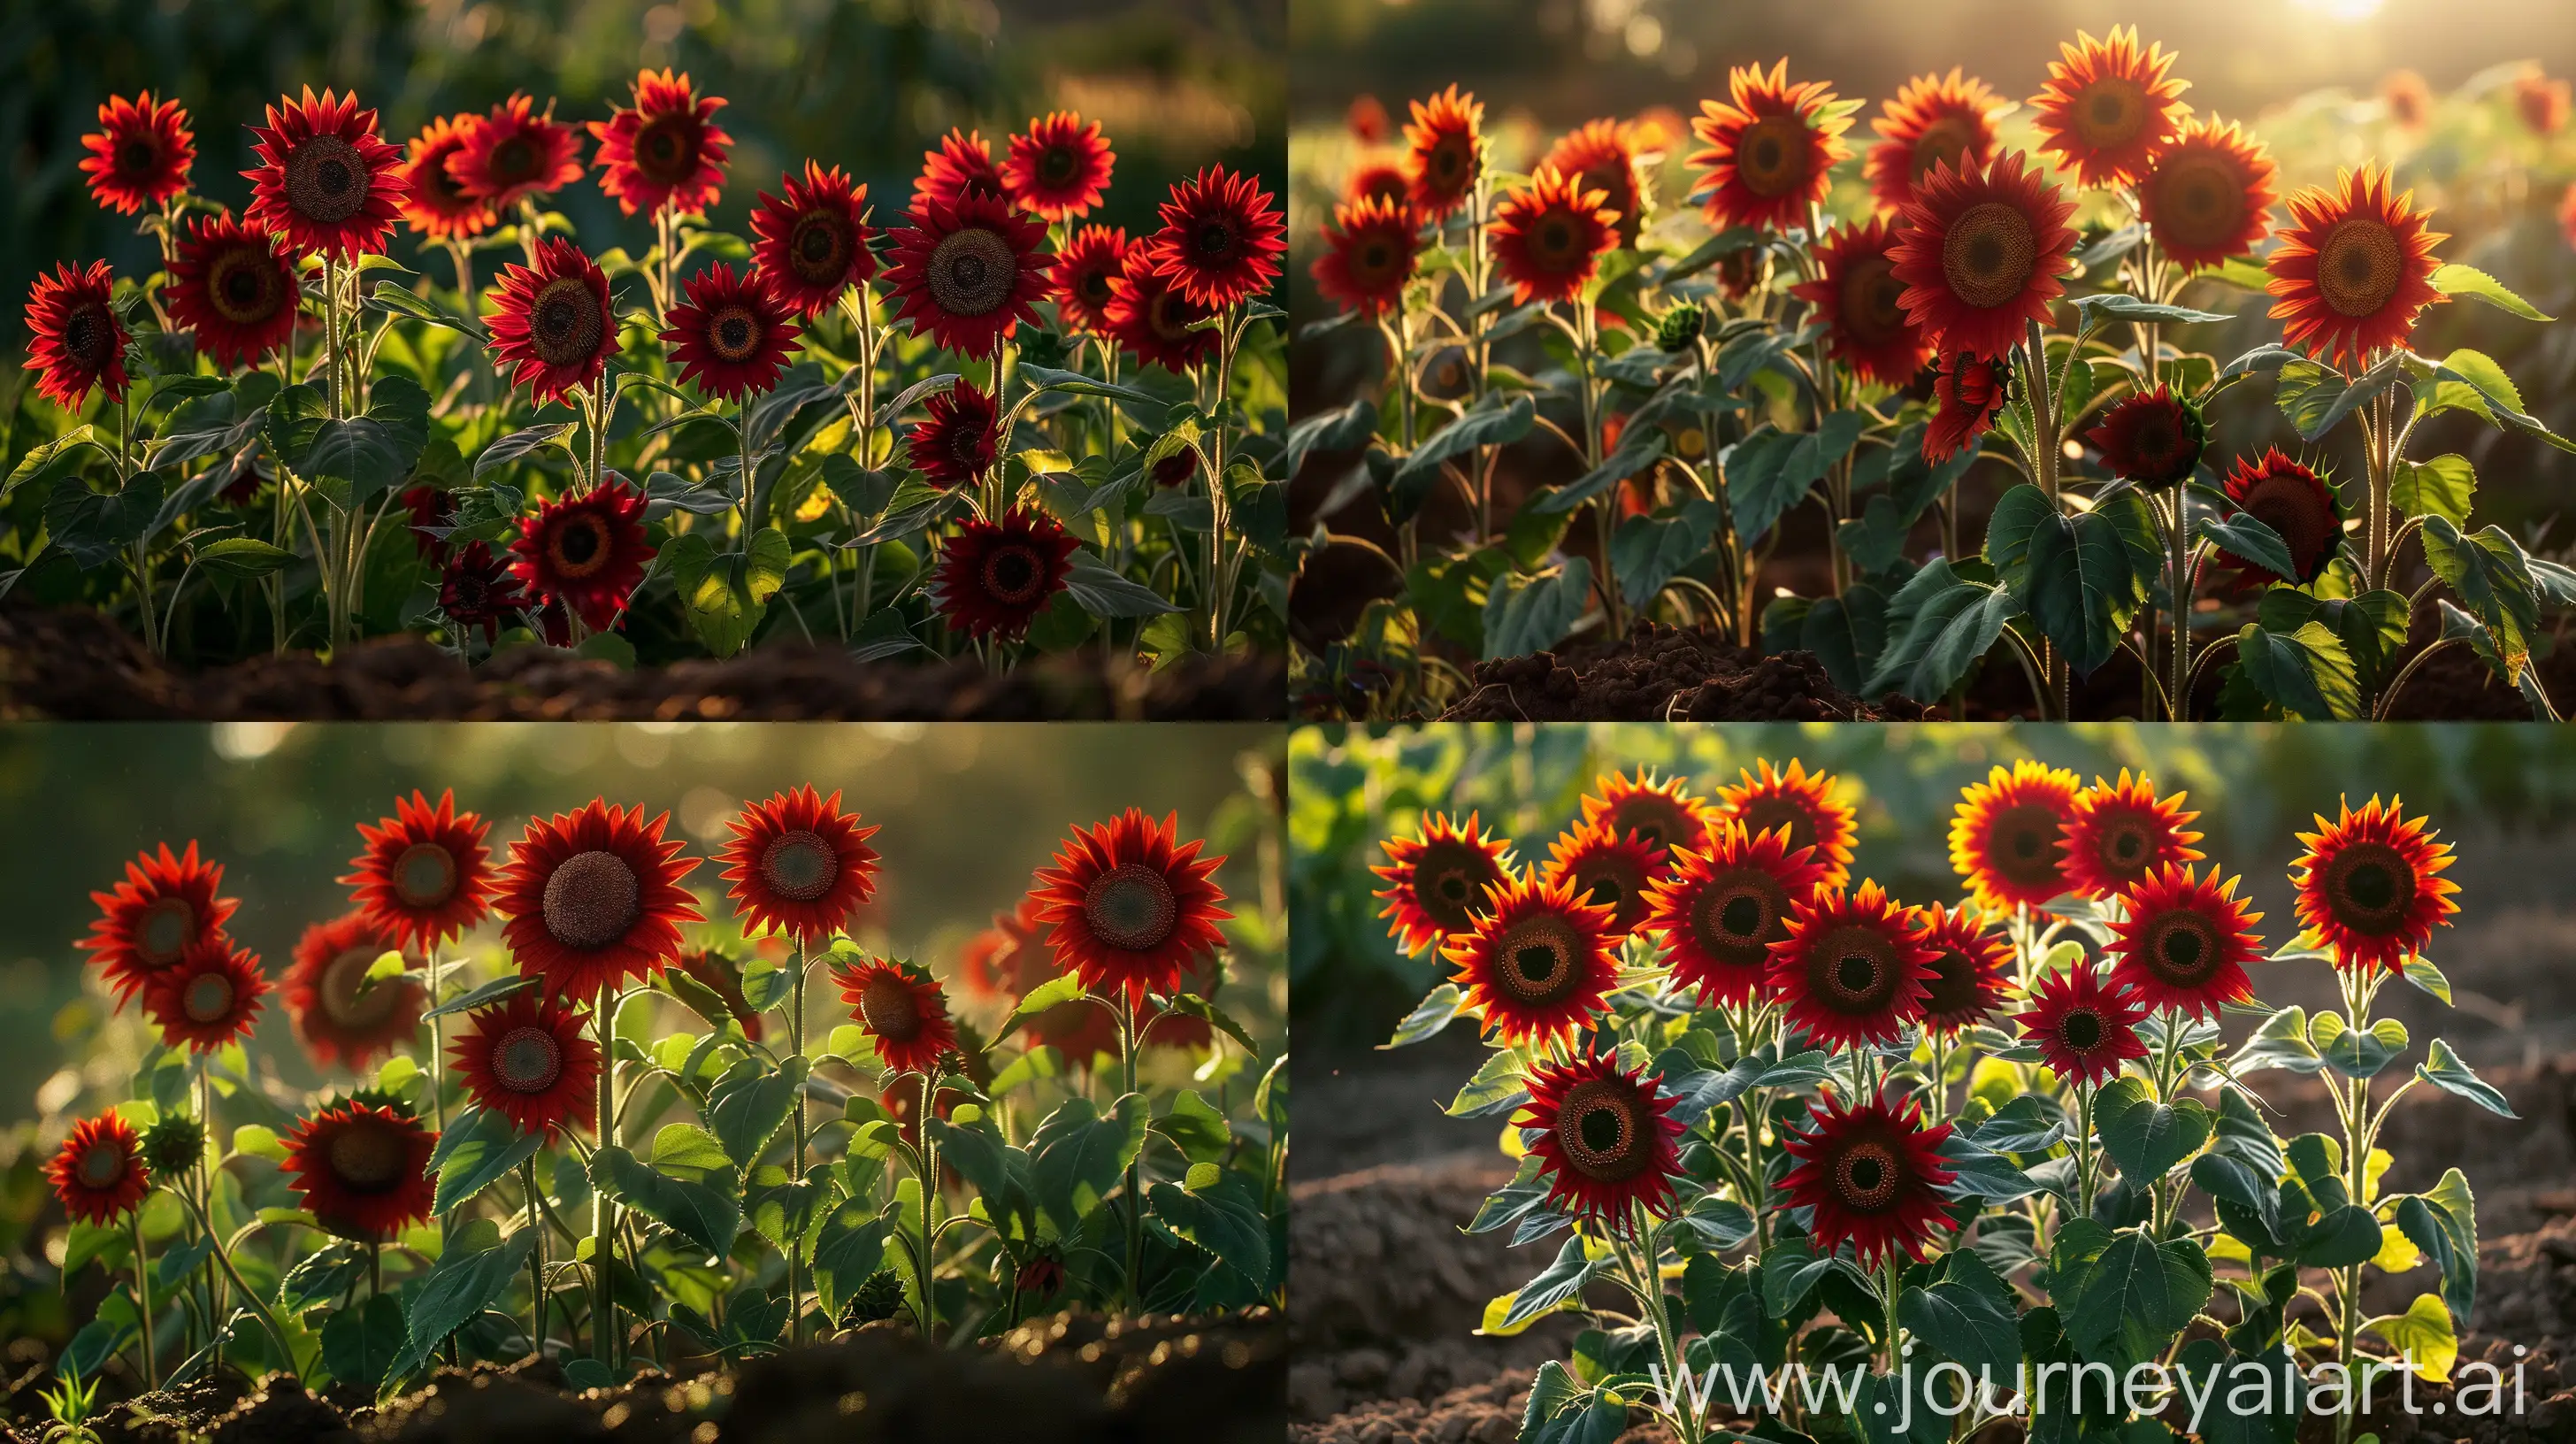 A captivating photograph capturing a red sunflowers in full bloom, their vibrant petals contrasting against the verdant foliage. The sun, casting a warm, golden glow, bathes the scene in a serene ambiance, illuminating the intricate details of each flower. The composition centers on a cluster of these crimson beauties, their towering stems swaying gently in the breeze. The rich, earthy tones of the soil provide a natural backdrop, enhancing the vividness of the flowers. The image evokes a sense of tranquility and natural beauty, inviting viewers to immerse themselves in the splendor of the floral landscape. --ar 16:9